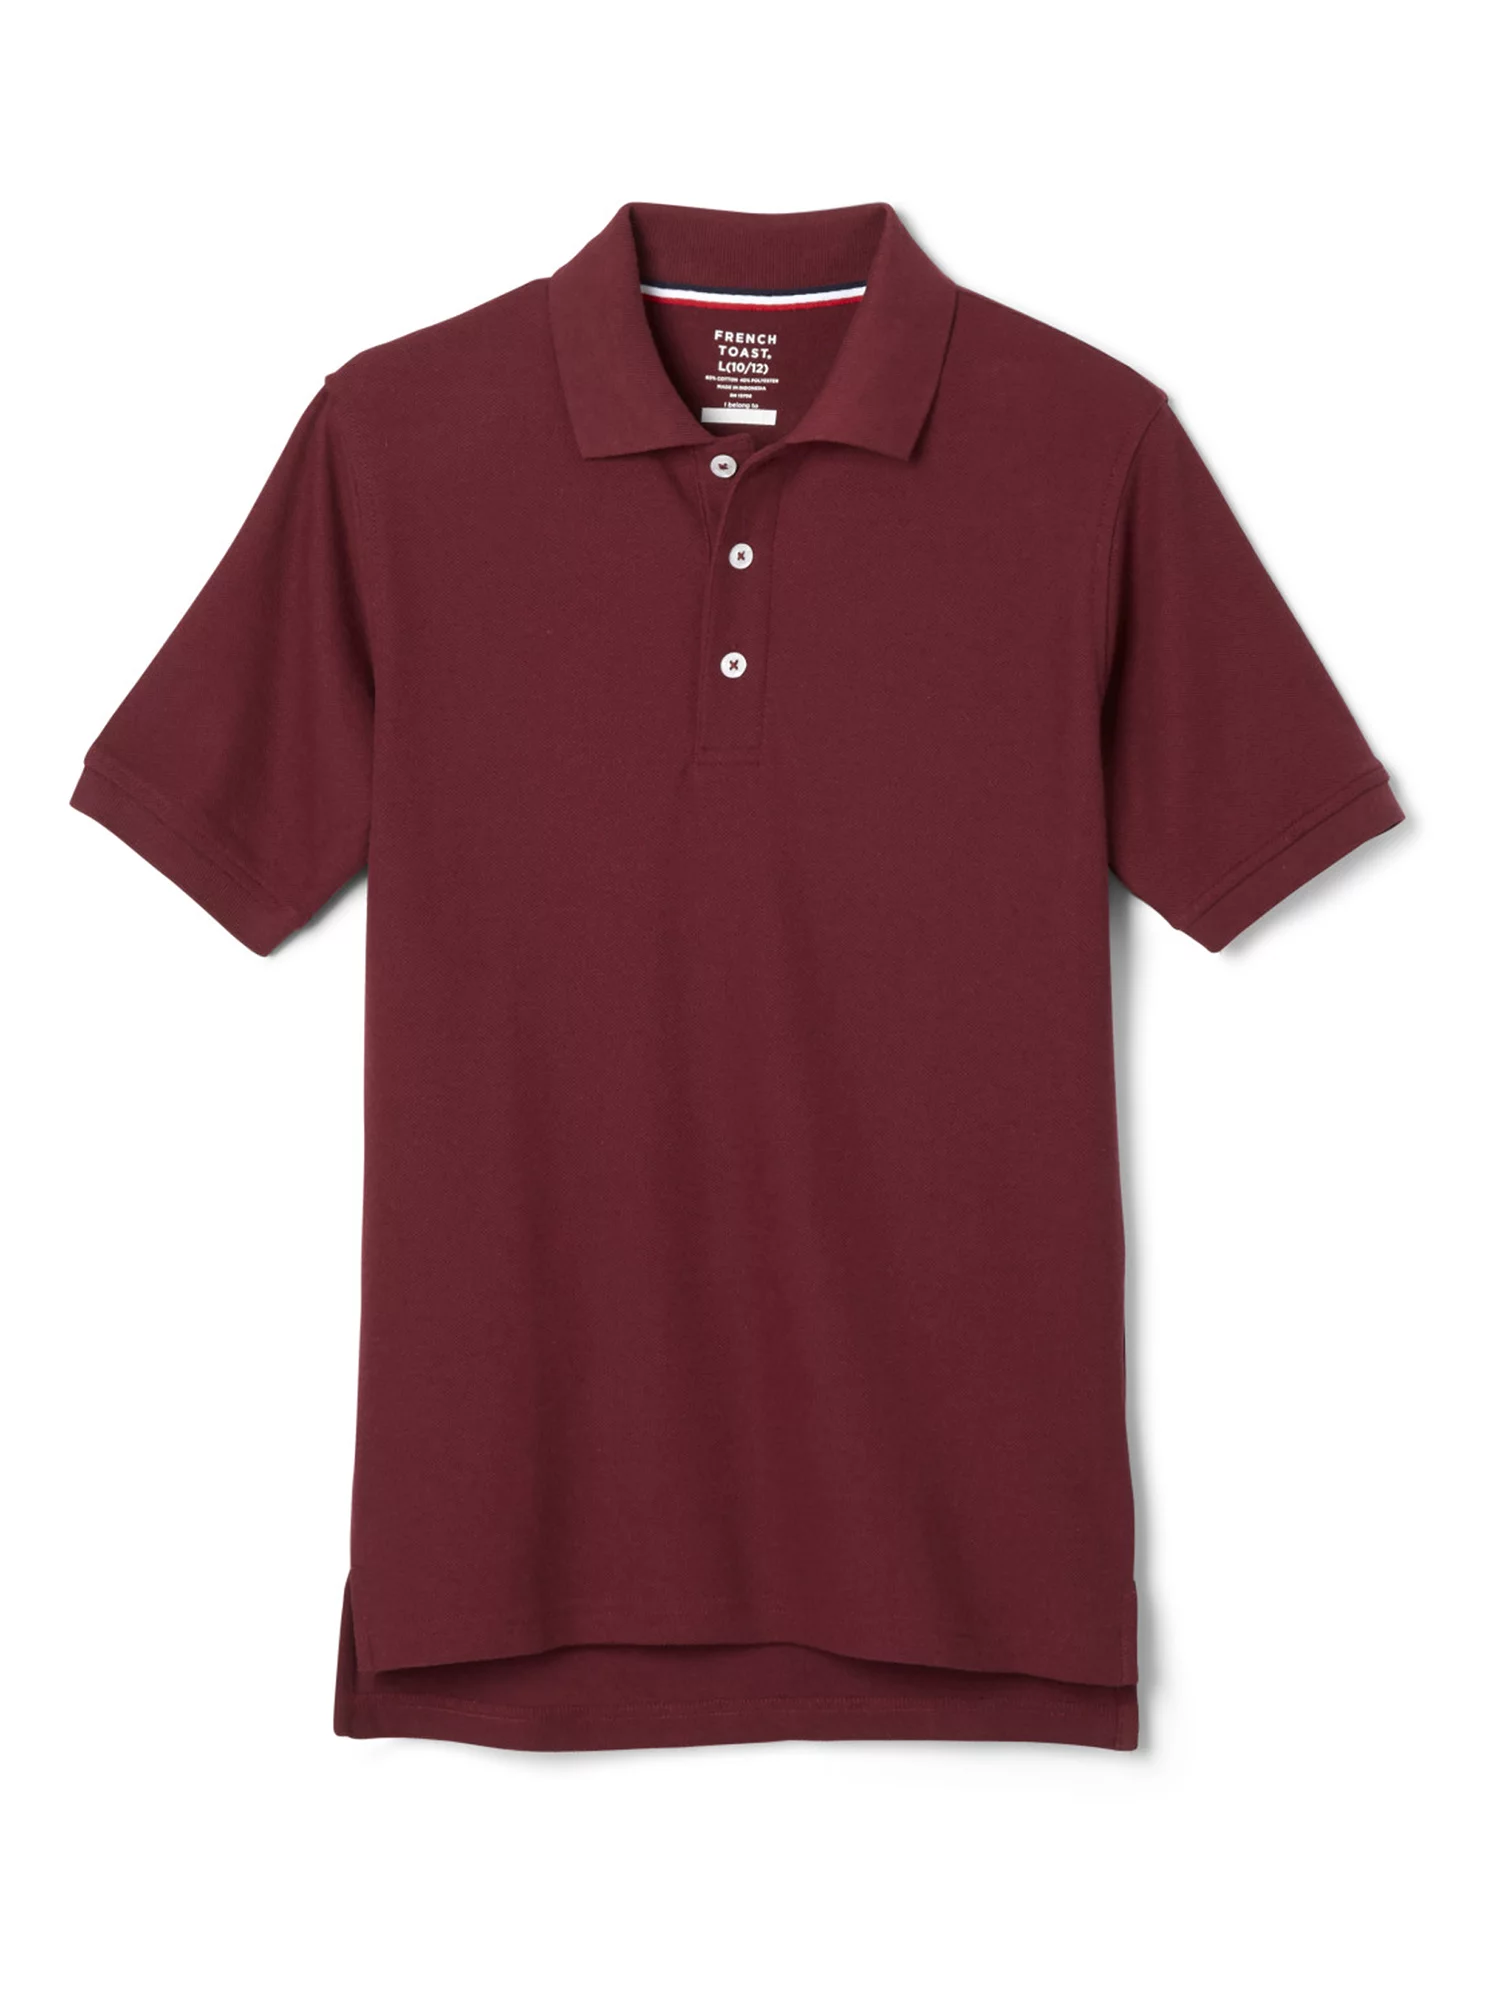 Wholesale Polo Shirt Supplier In Russia